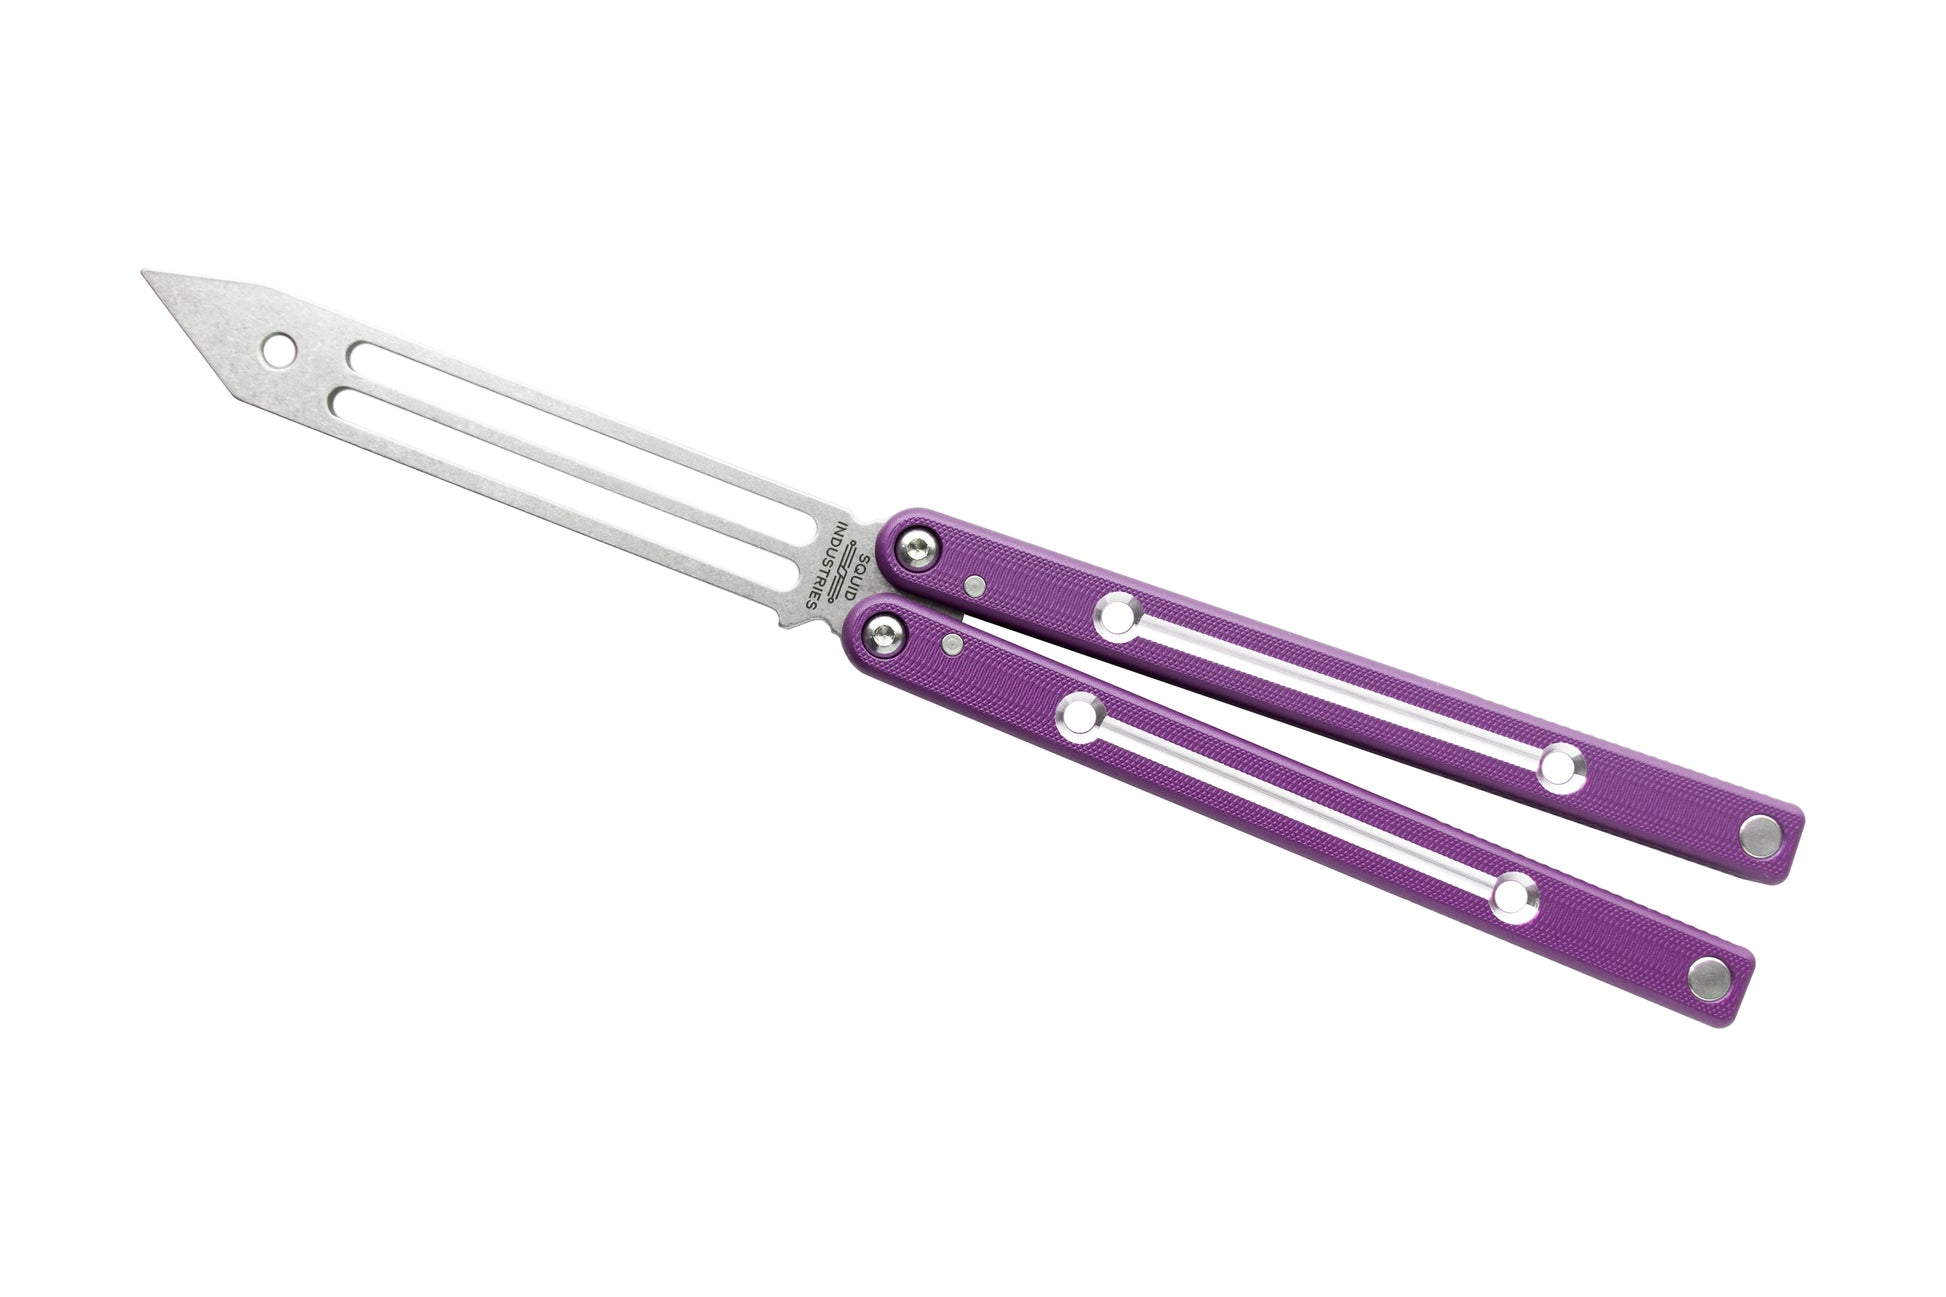 Dual-Tone Purple Clearance Blemished Squidtrainer V4 Balisong Butterfly Knife Trainer 